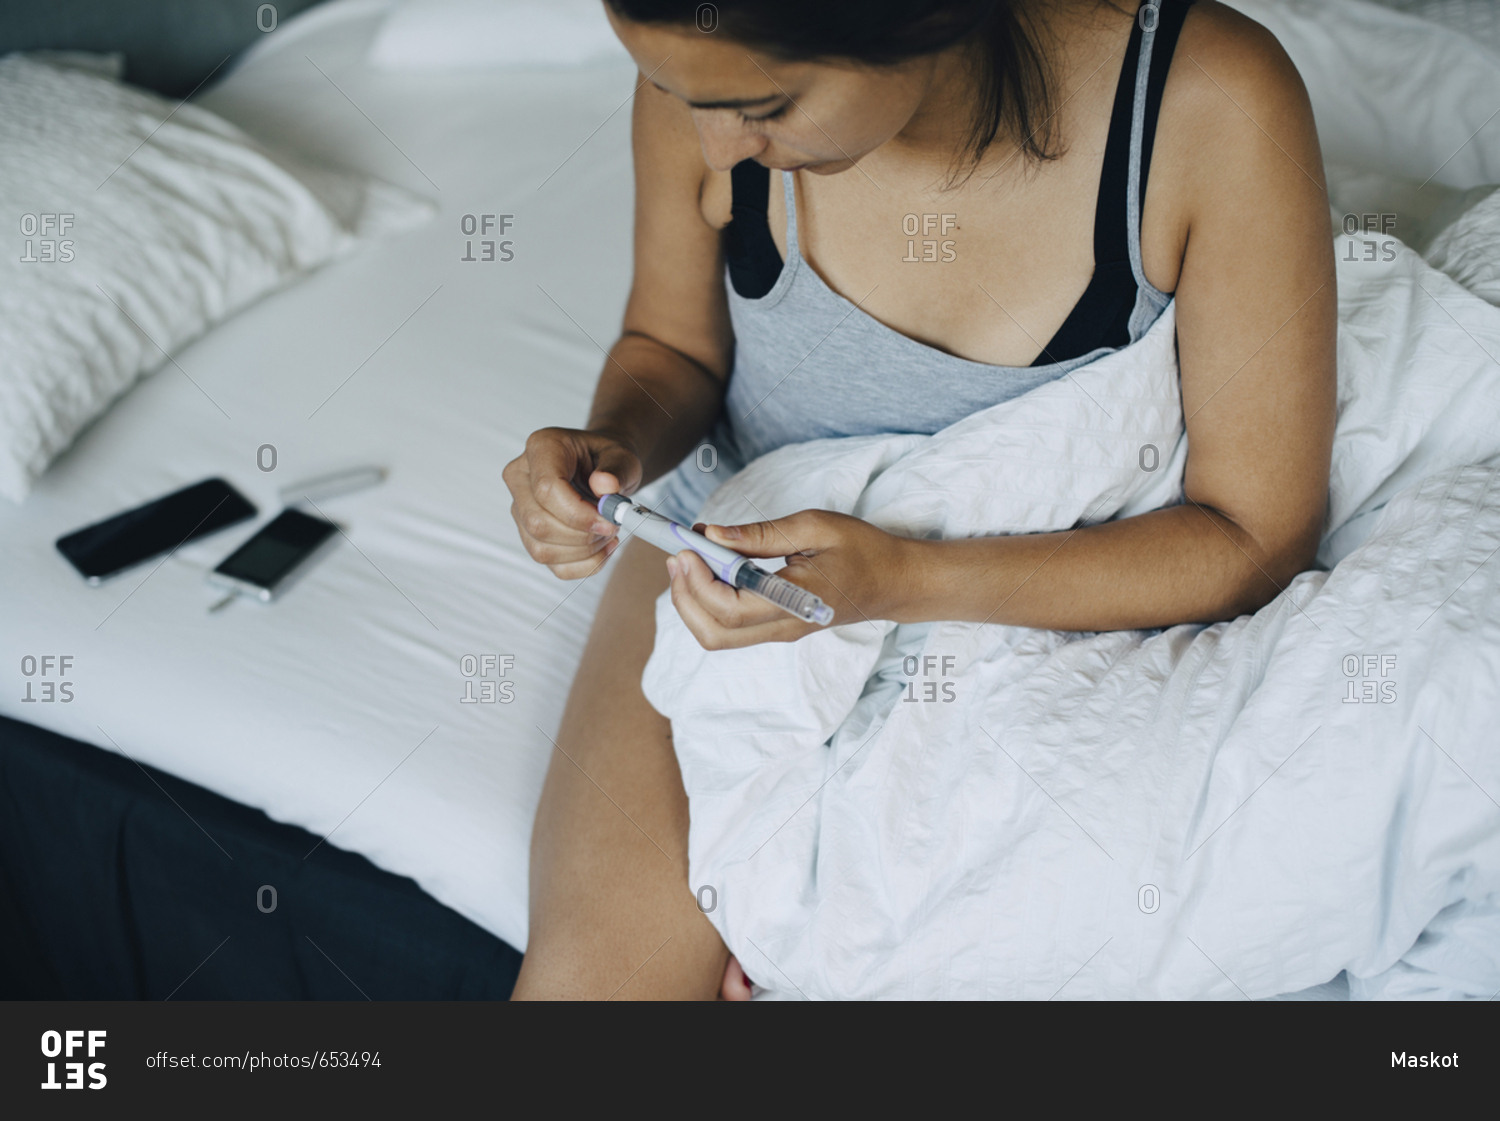 Woman looking at injection pen while sitting on bed in bedroom